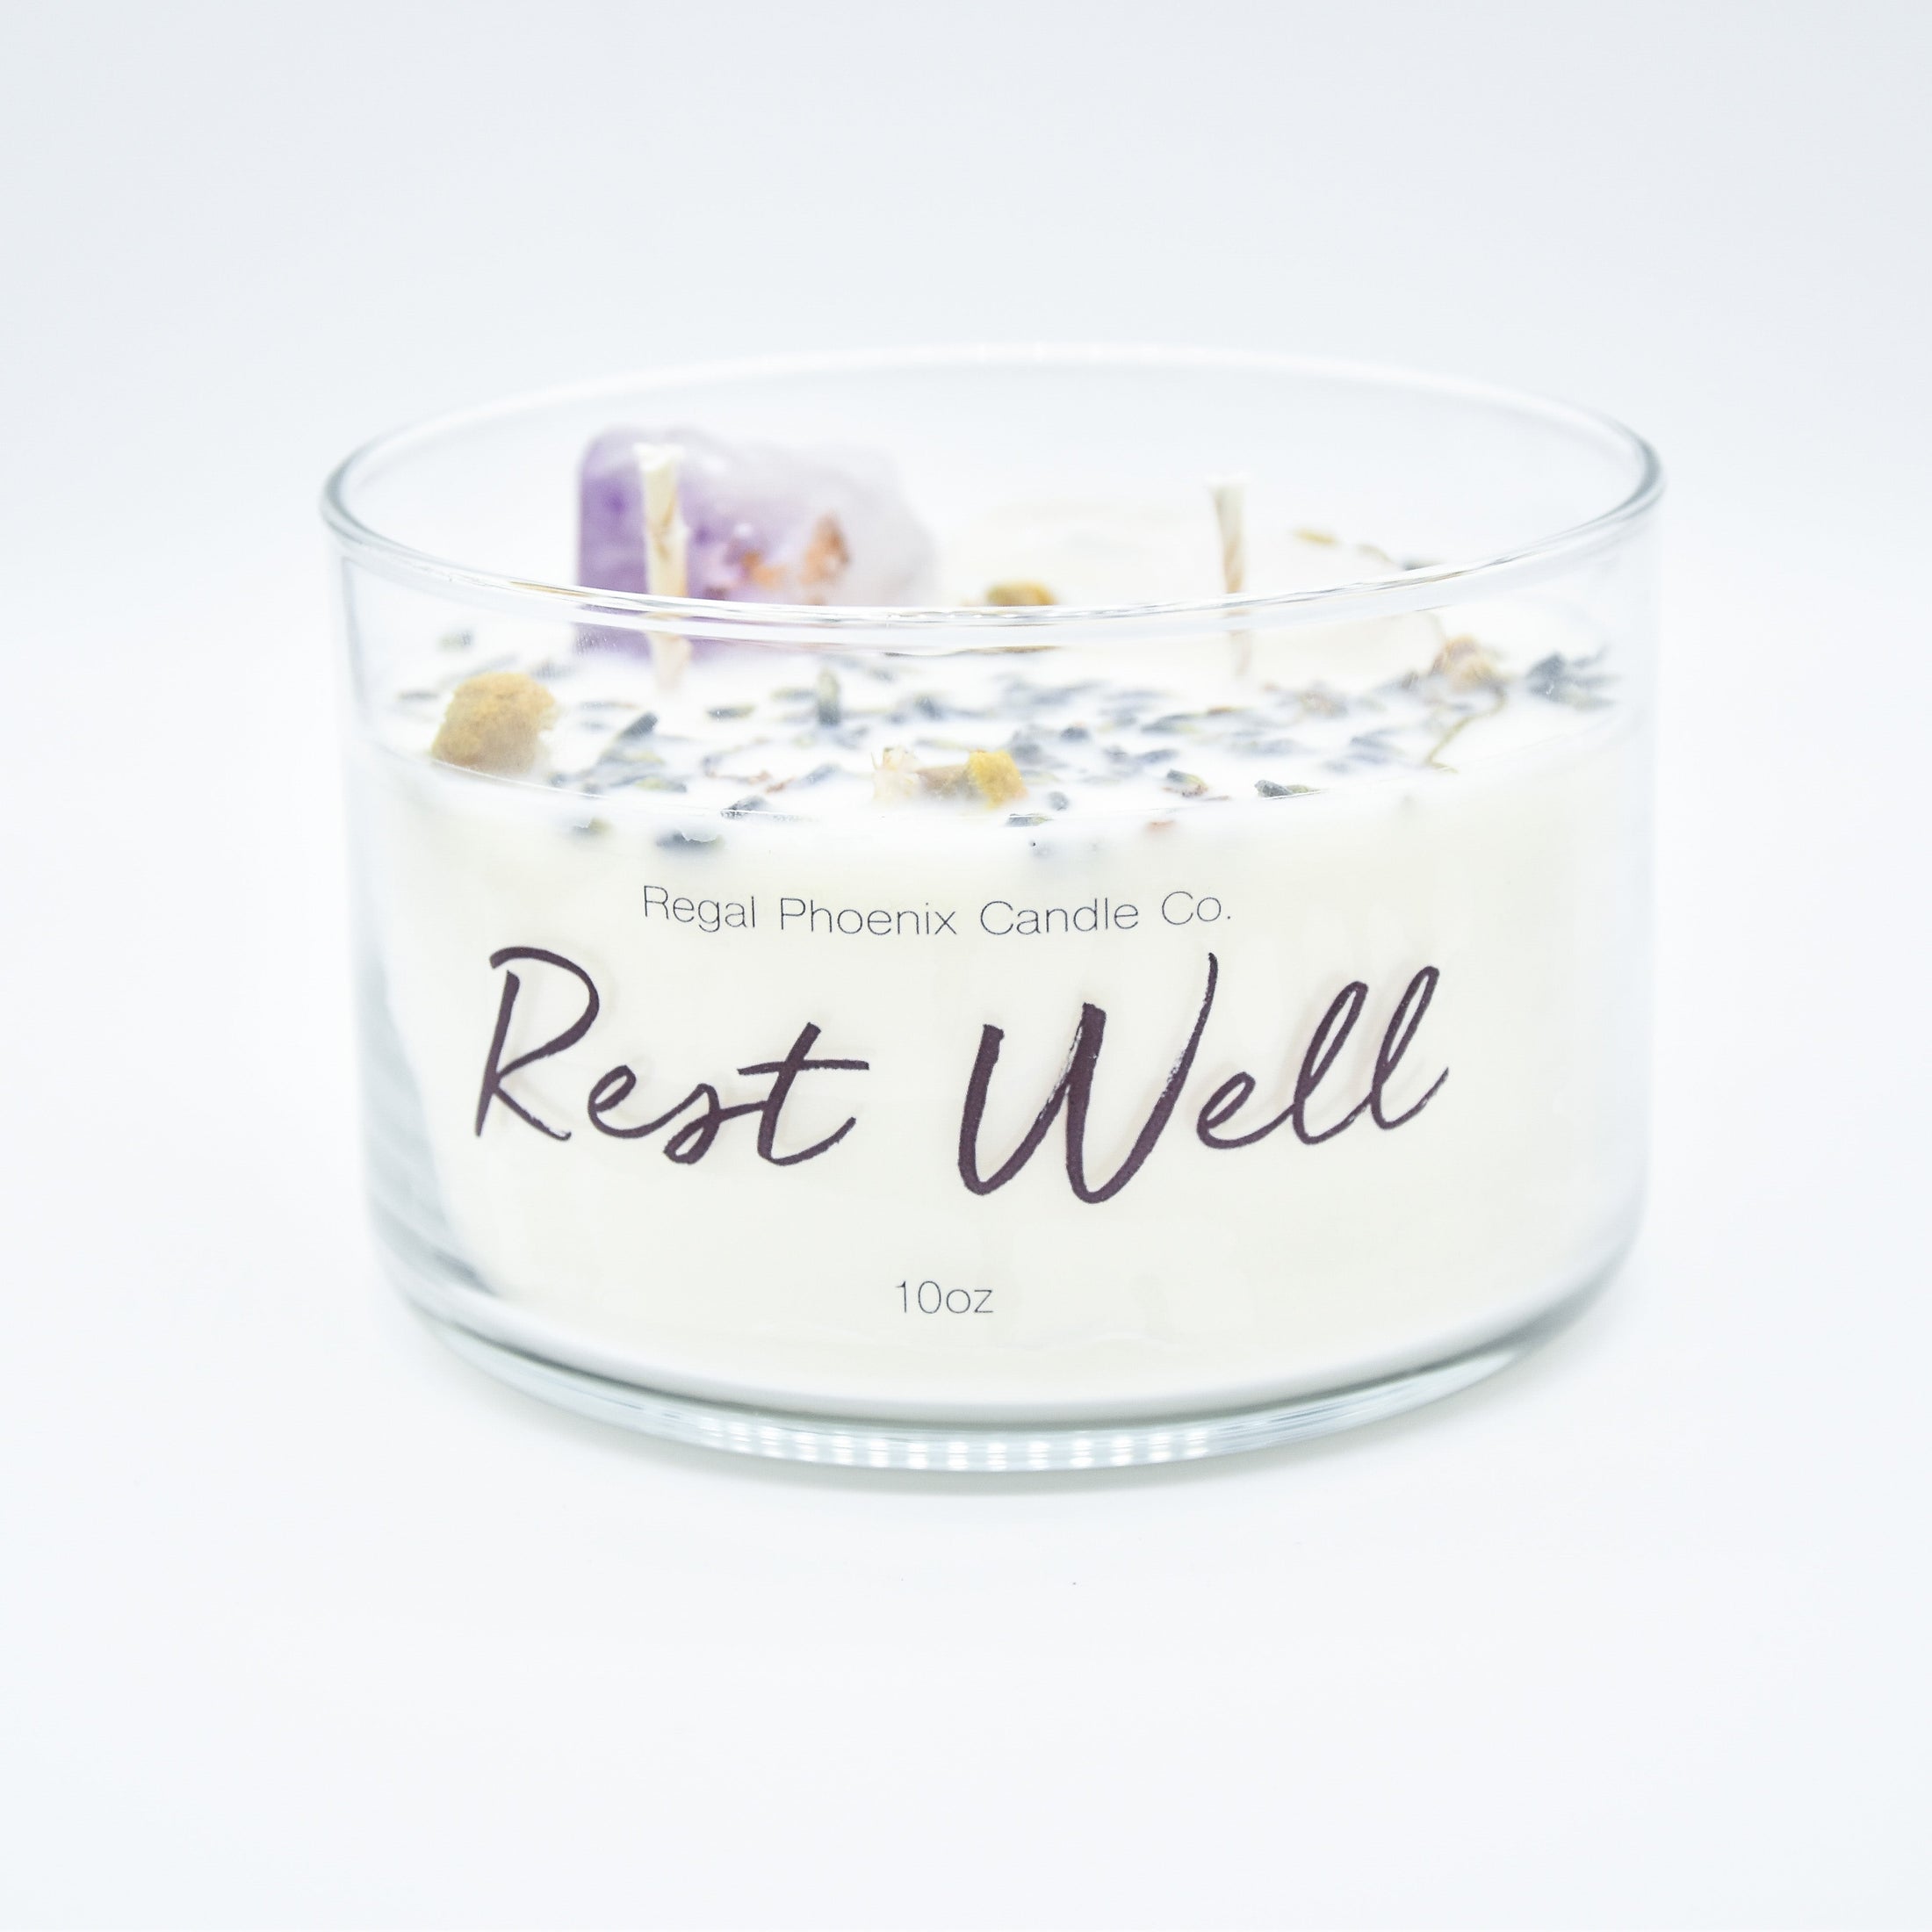 "Rest Well" Crystal Infused Soy Candle